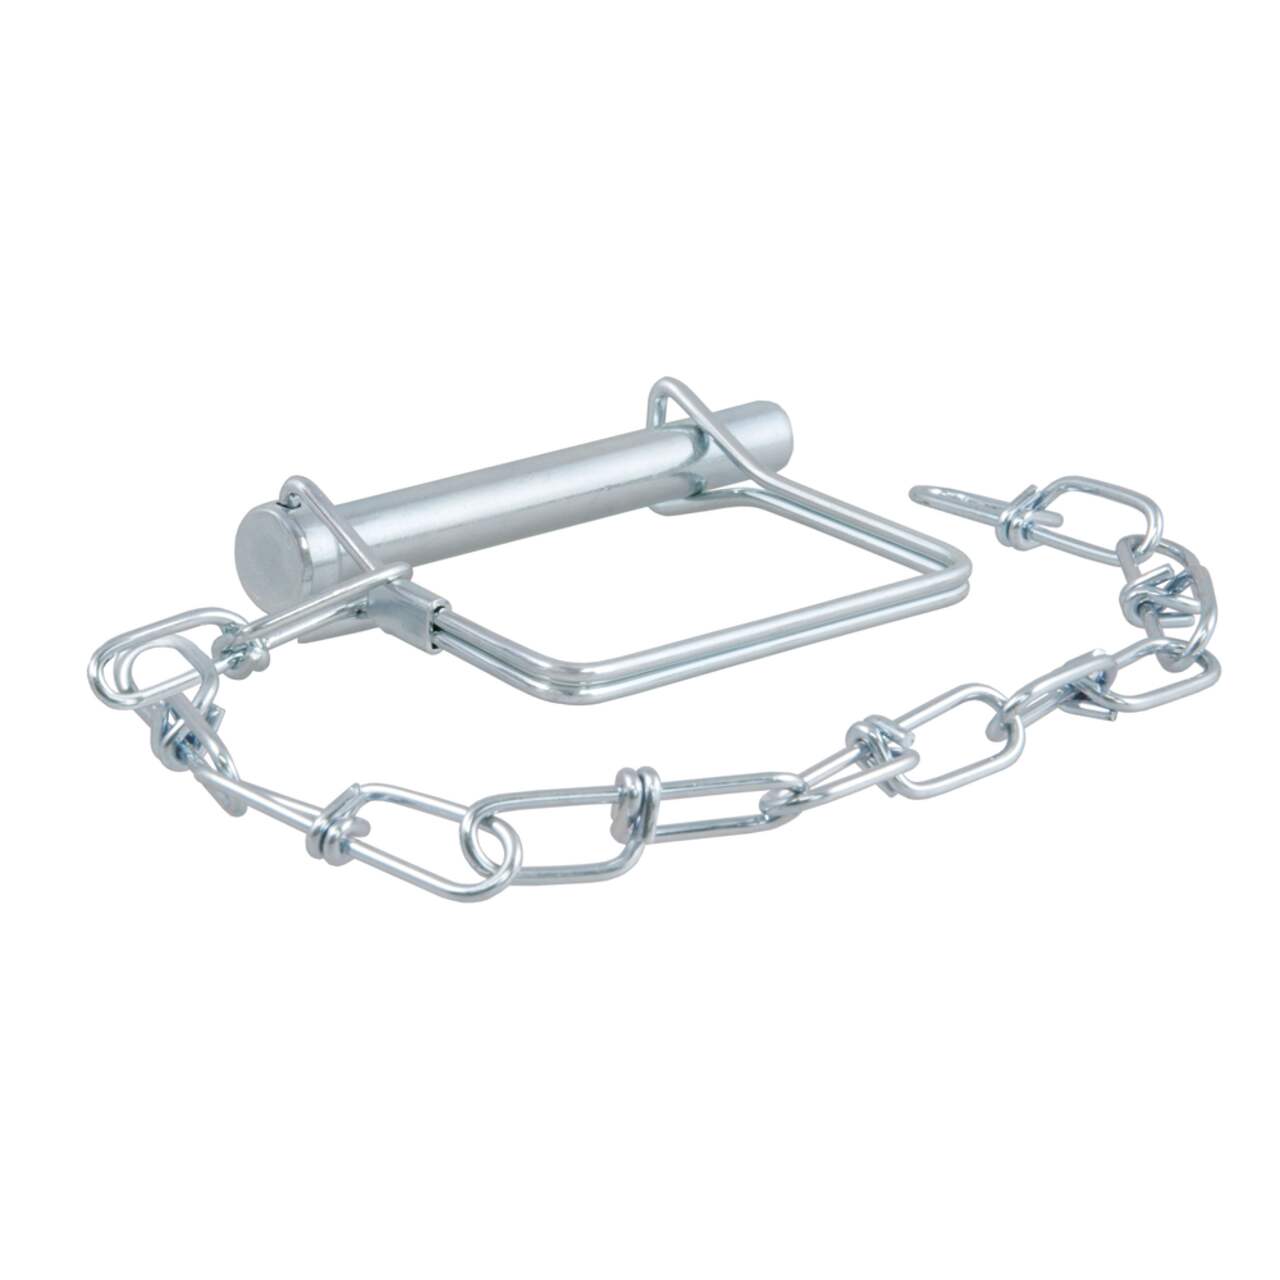 https://media-www.canadiantire.ca/product/automotive/automotive-outdoor-adventure/auto-travel-storage/1405917/3-8-safety-pin-with-12-chain-2-3-4-pin-length--e6d0de6c-a035-4cc4-a6ca-e67b2a1af650.png?imdensity=1&imwidth=640&impolicy=mZoom